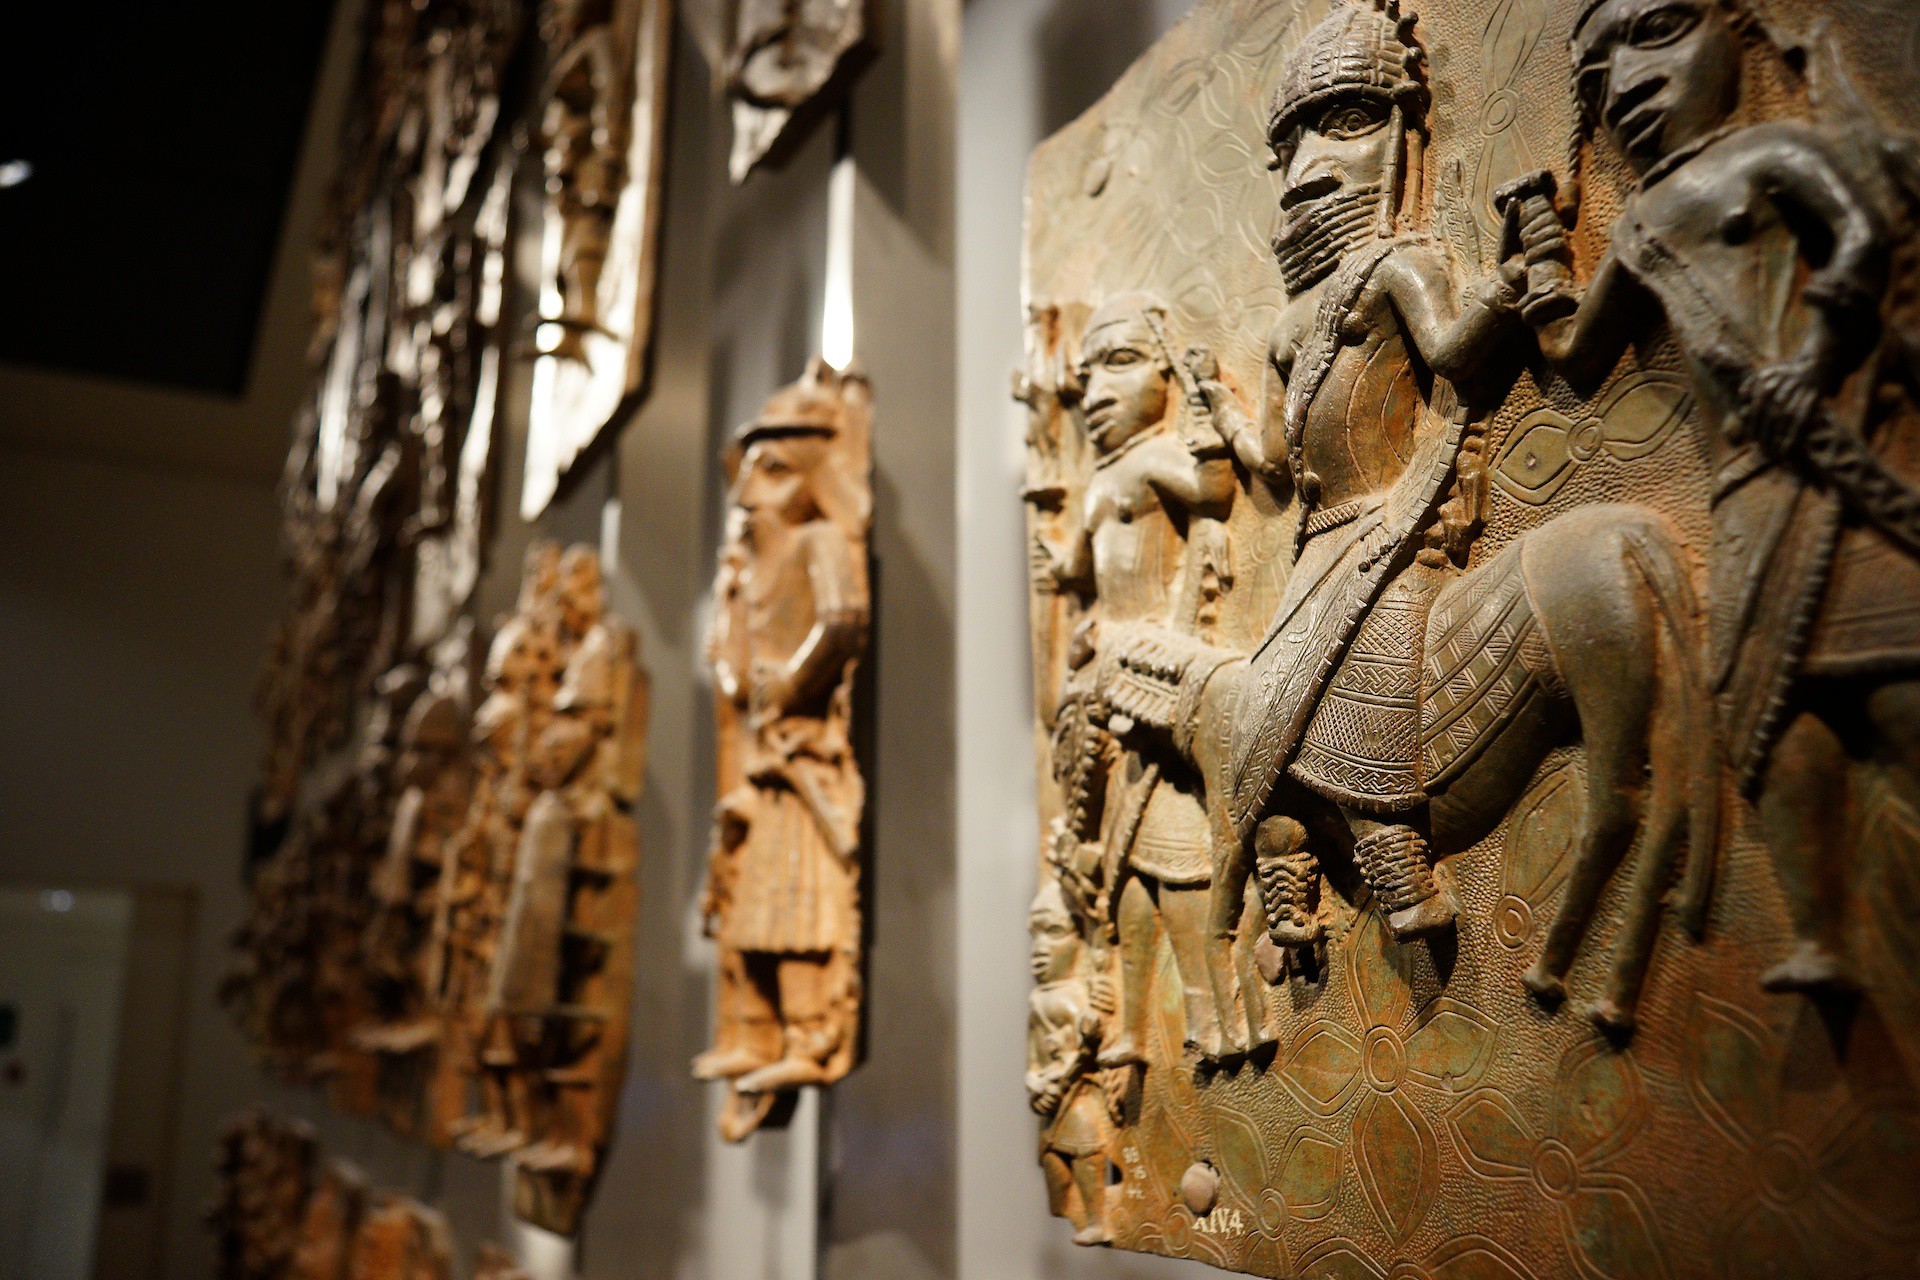 The Benin Bronzes in the African Gallery at the British Museum.